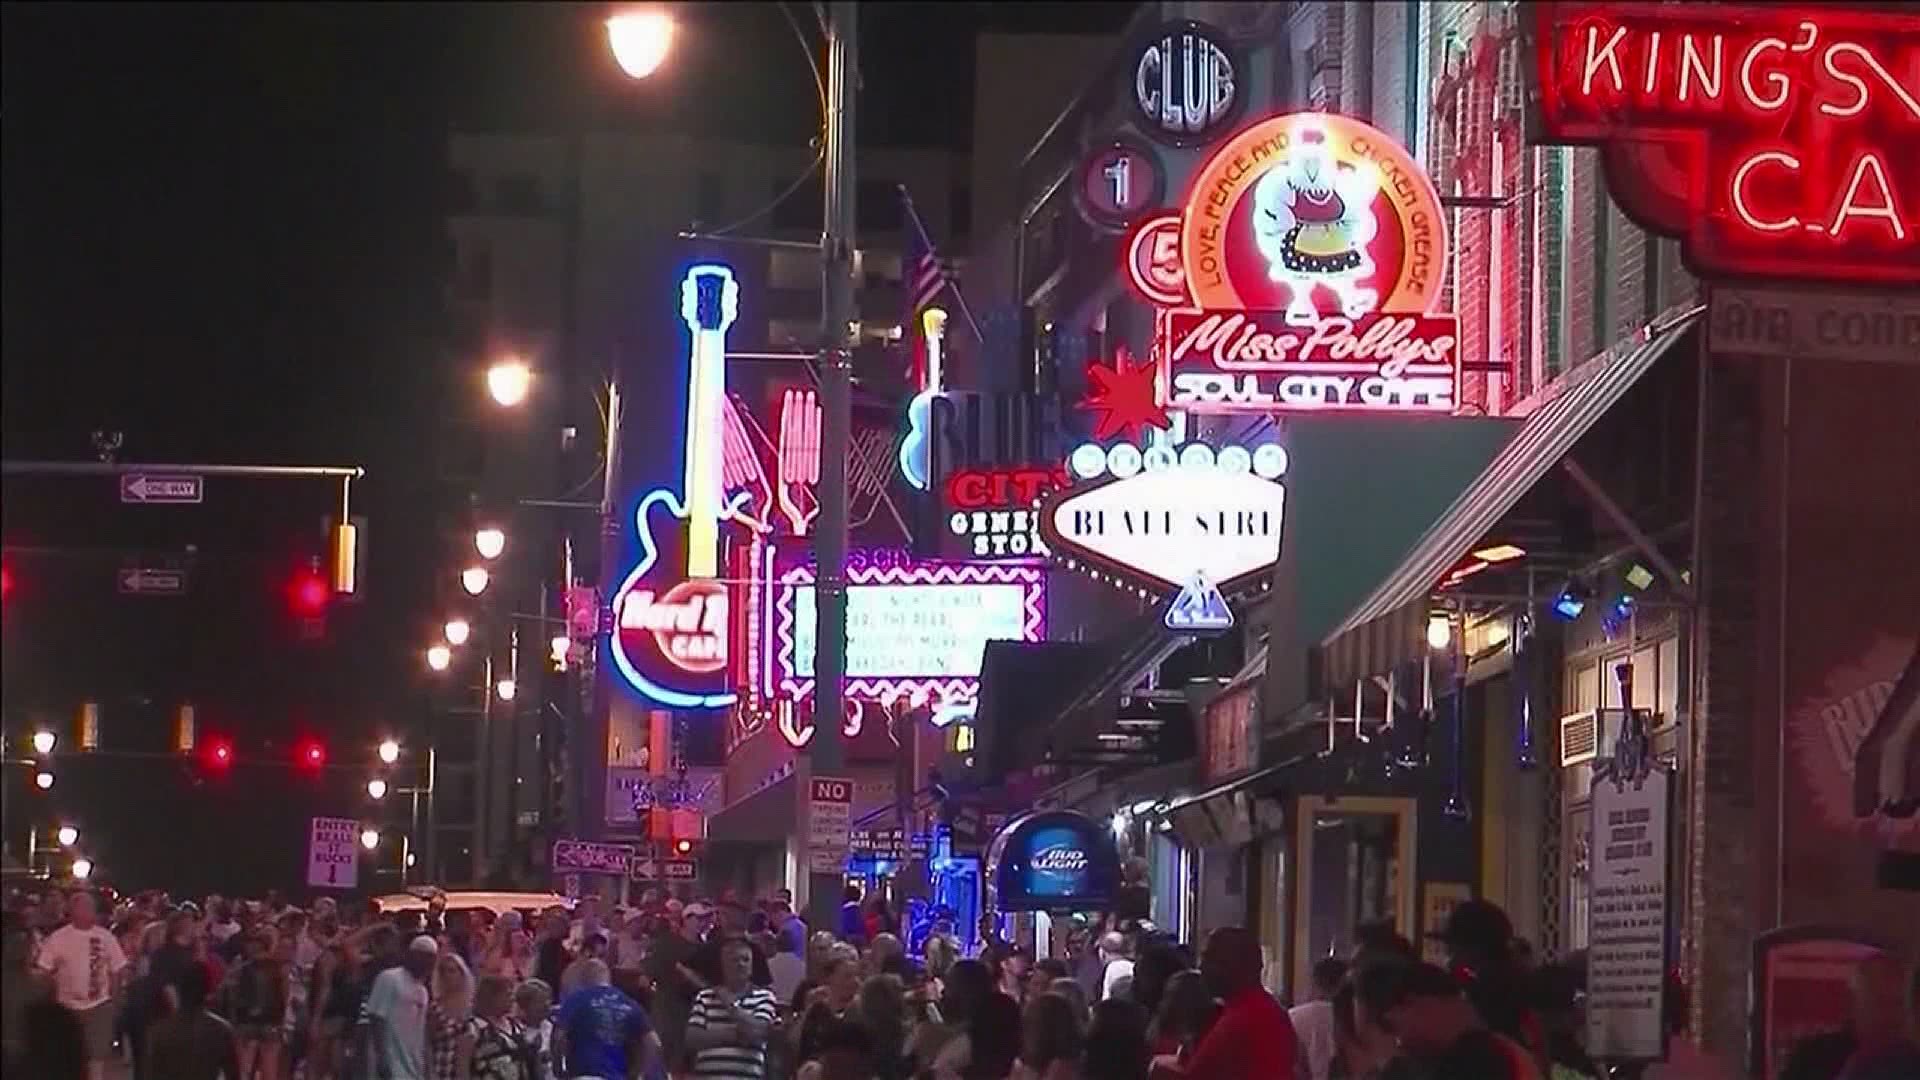 Not as big as we thought? The panel will also discuss concerns over Beale Street during the holiday weekend